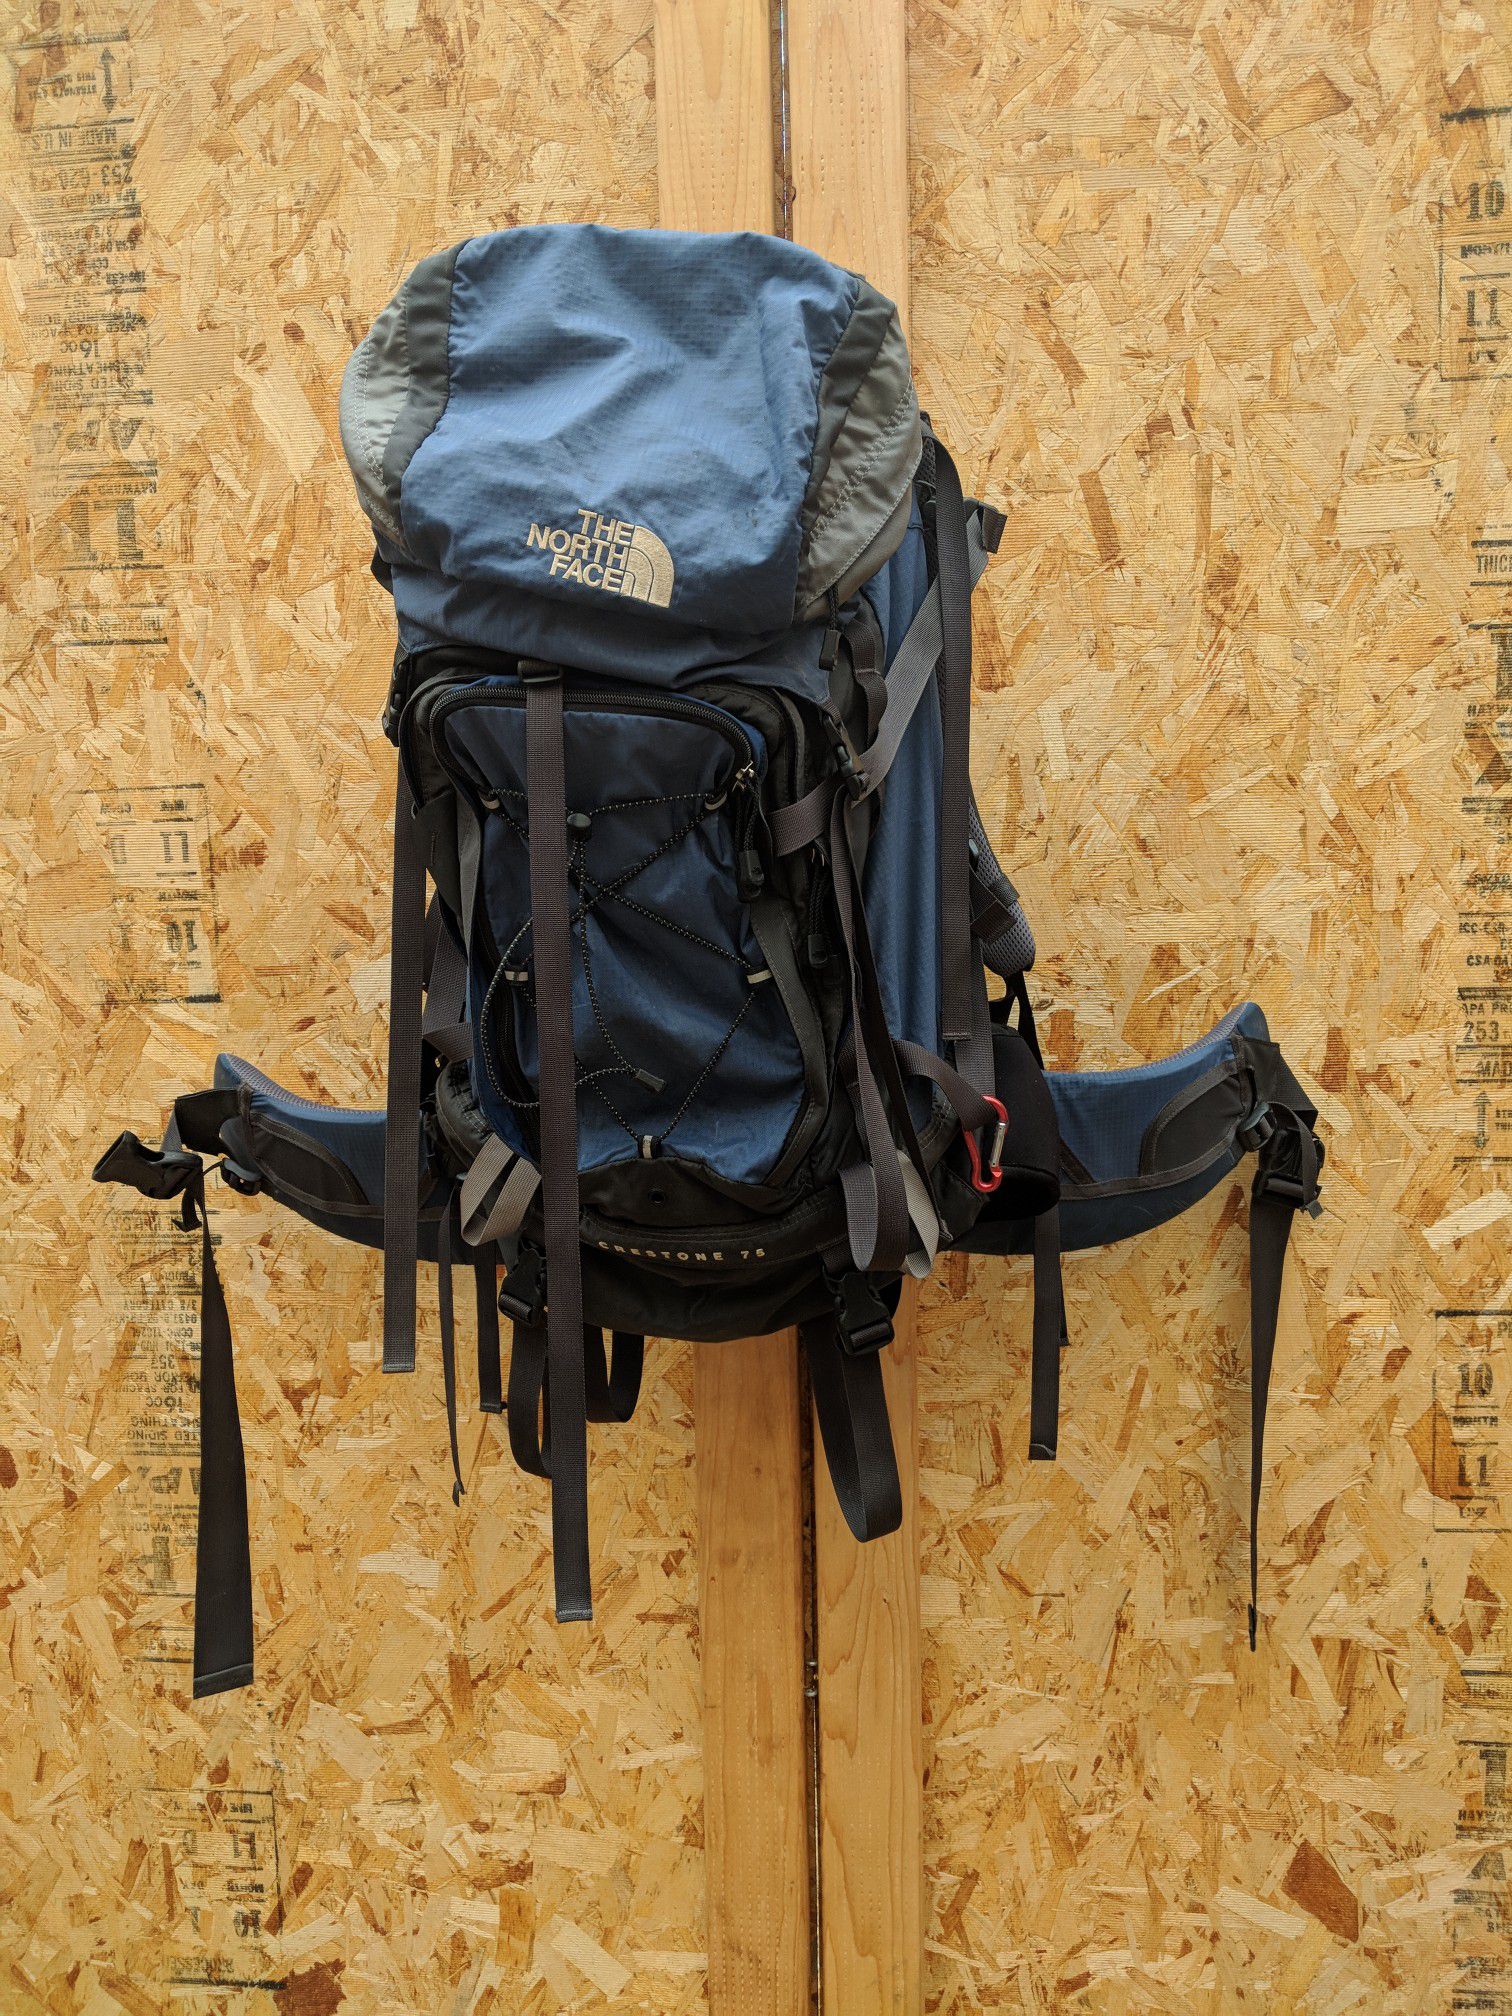 North Face hiking pack